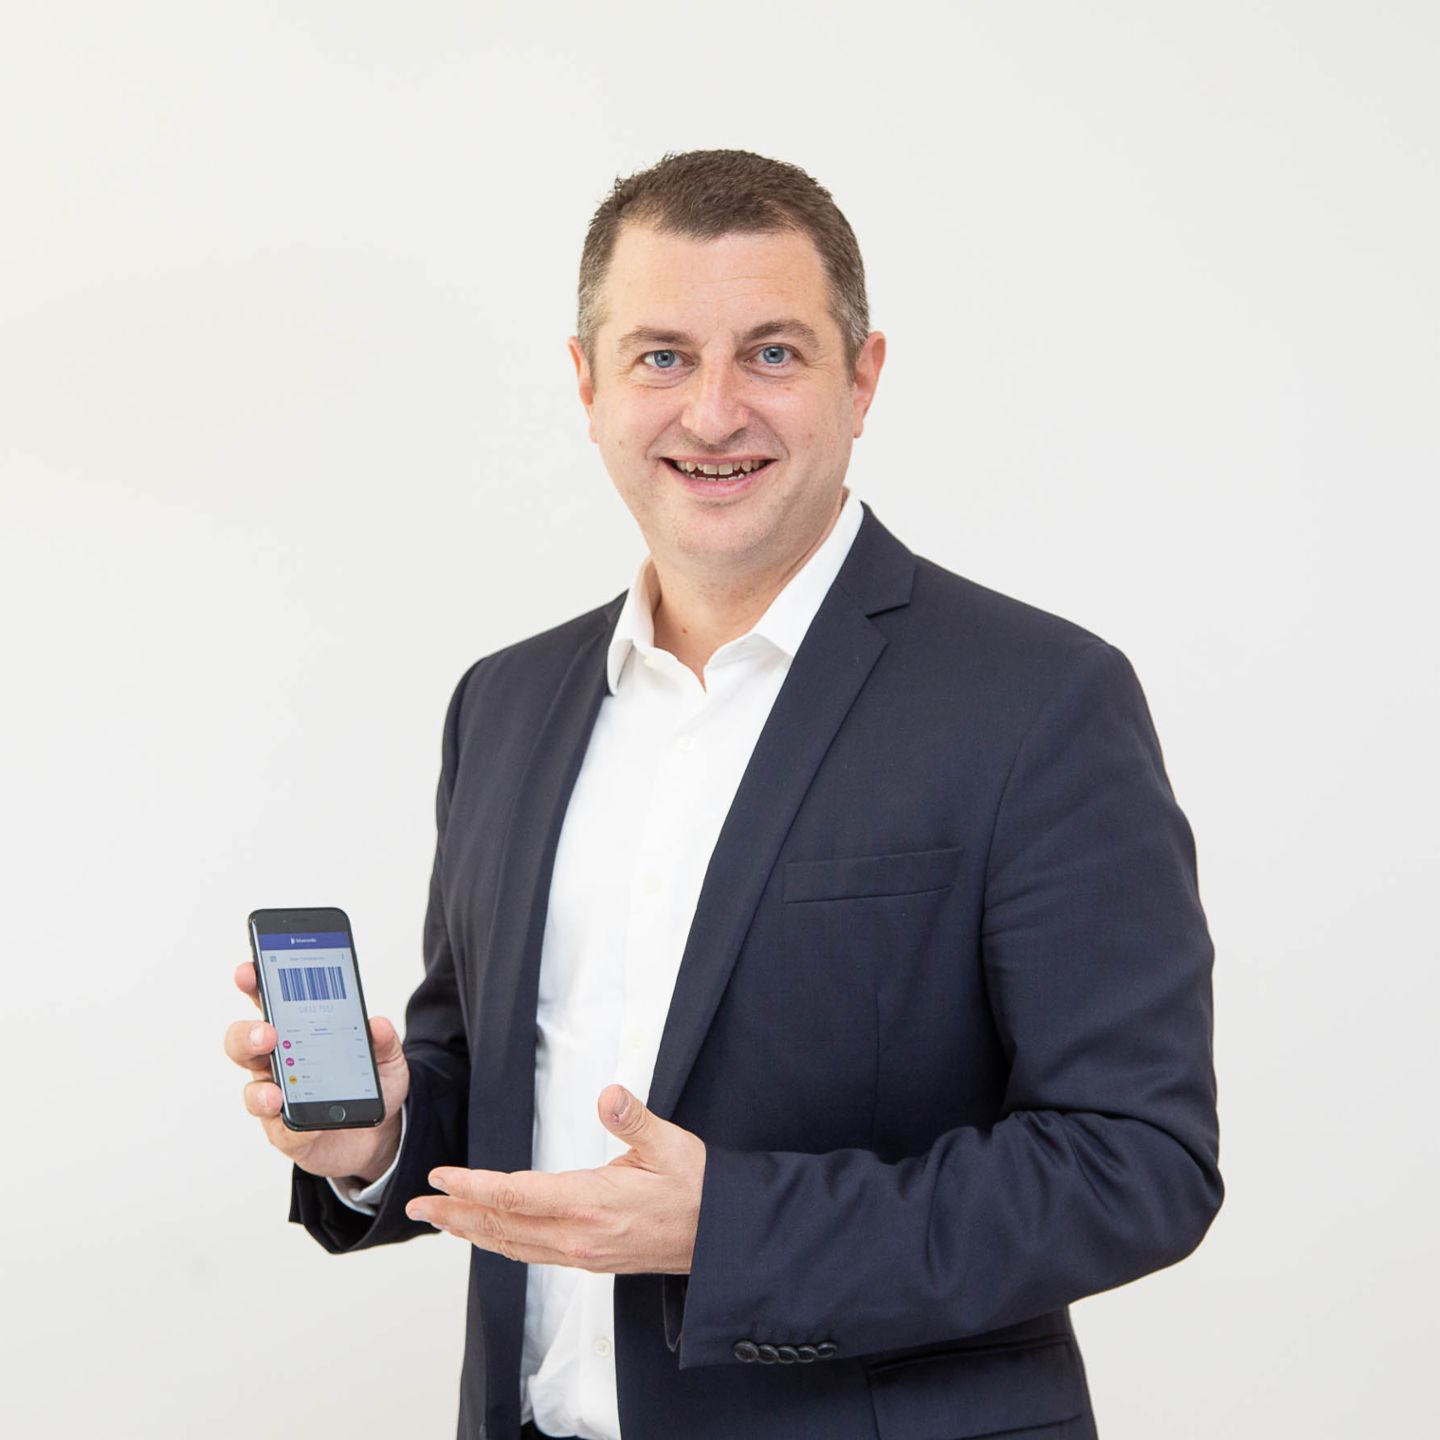 Mobile payment: Christian Pirkner is the CEO of Blue Code.